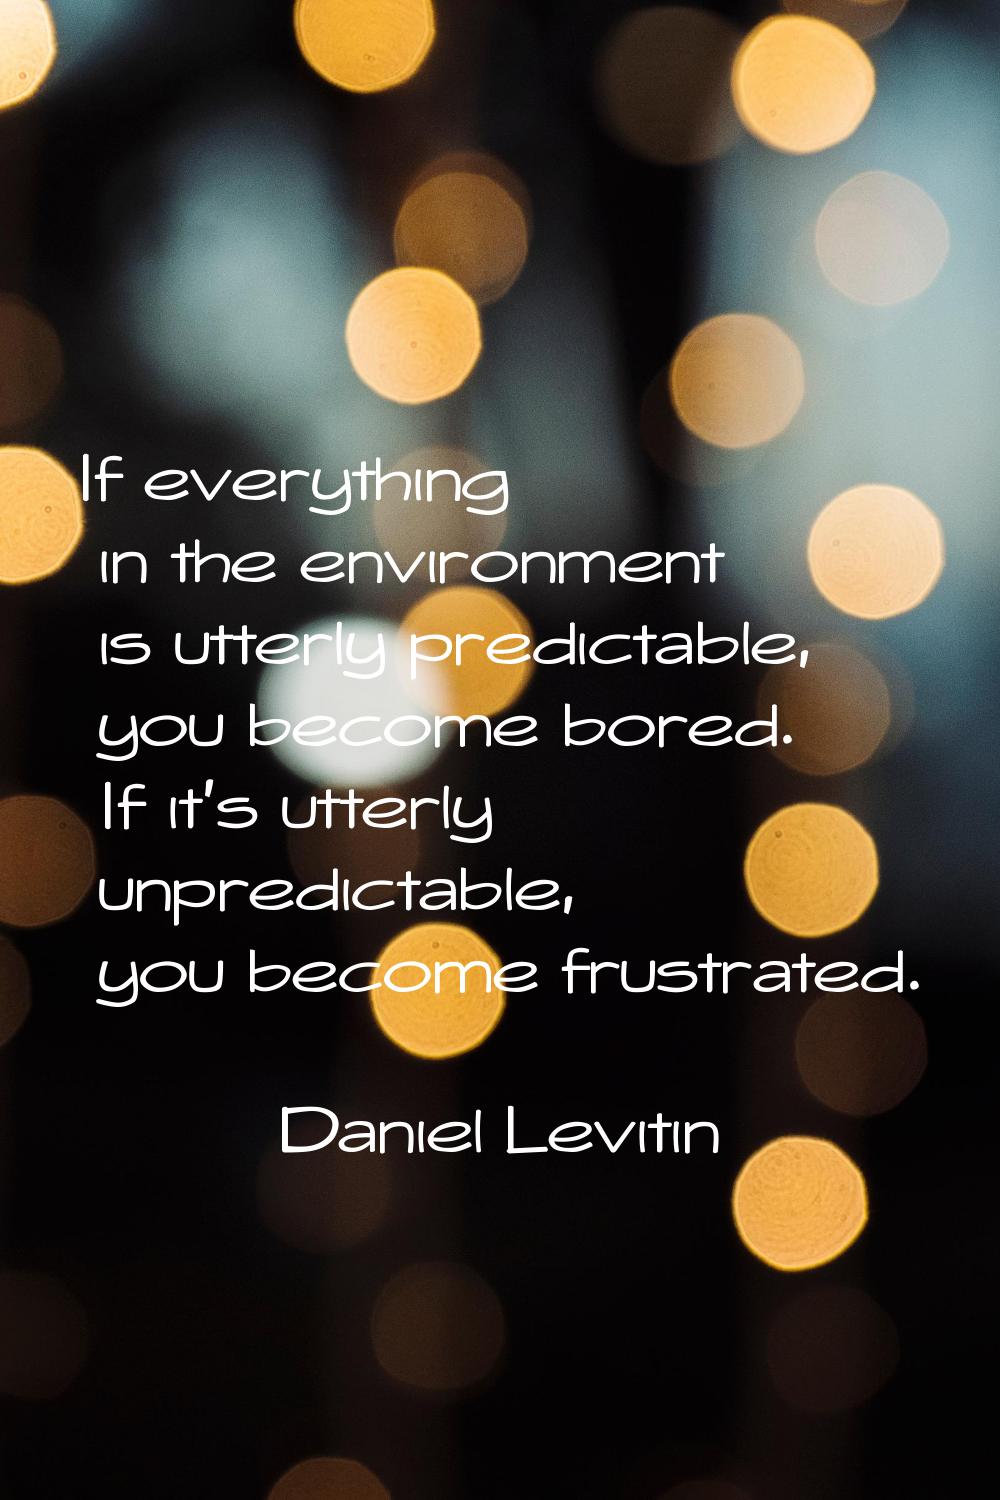 If everything in the environment is utterly predictable, you become bored. If it's utterly unpredic